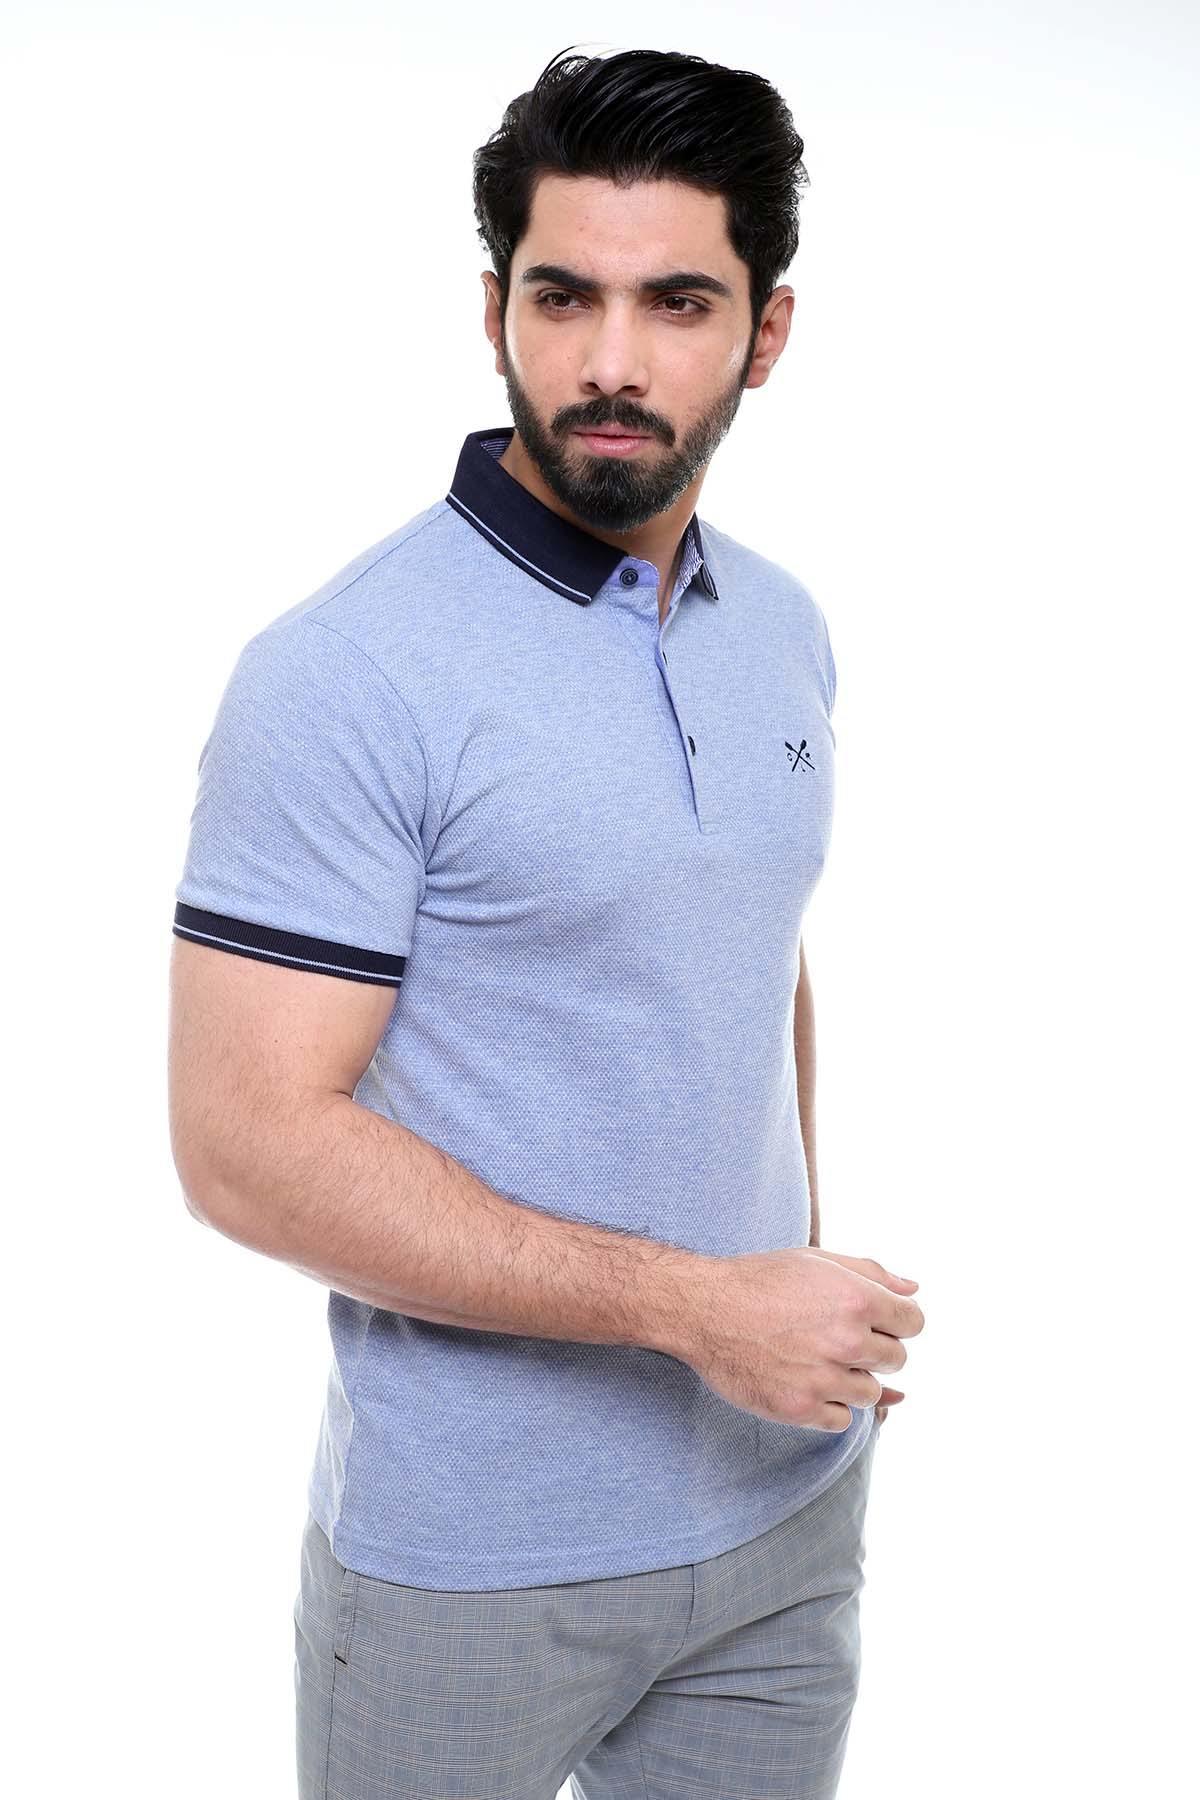 T SHIRT POLO SKY BLUE at Charcoal Clothing